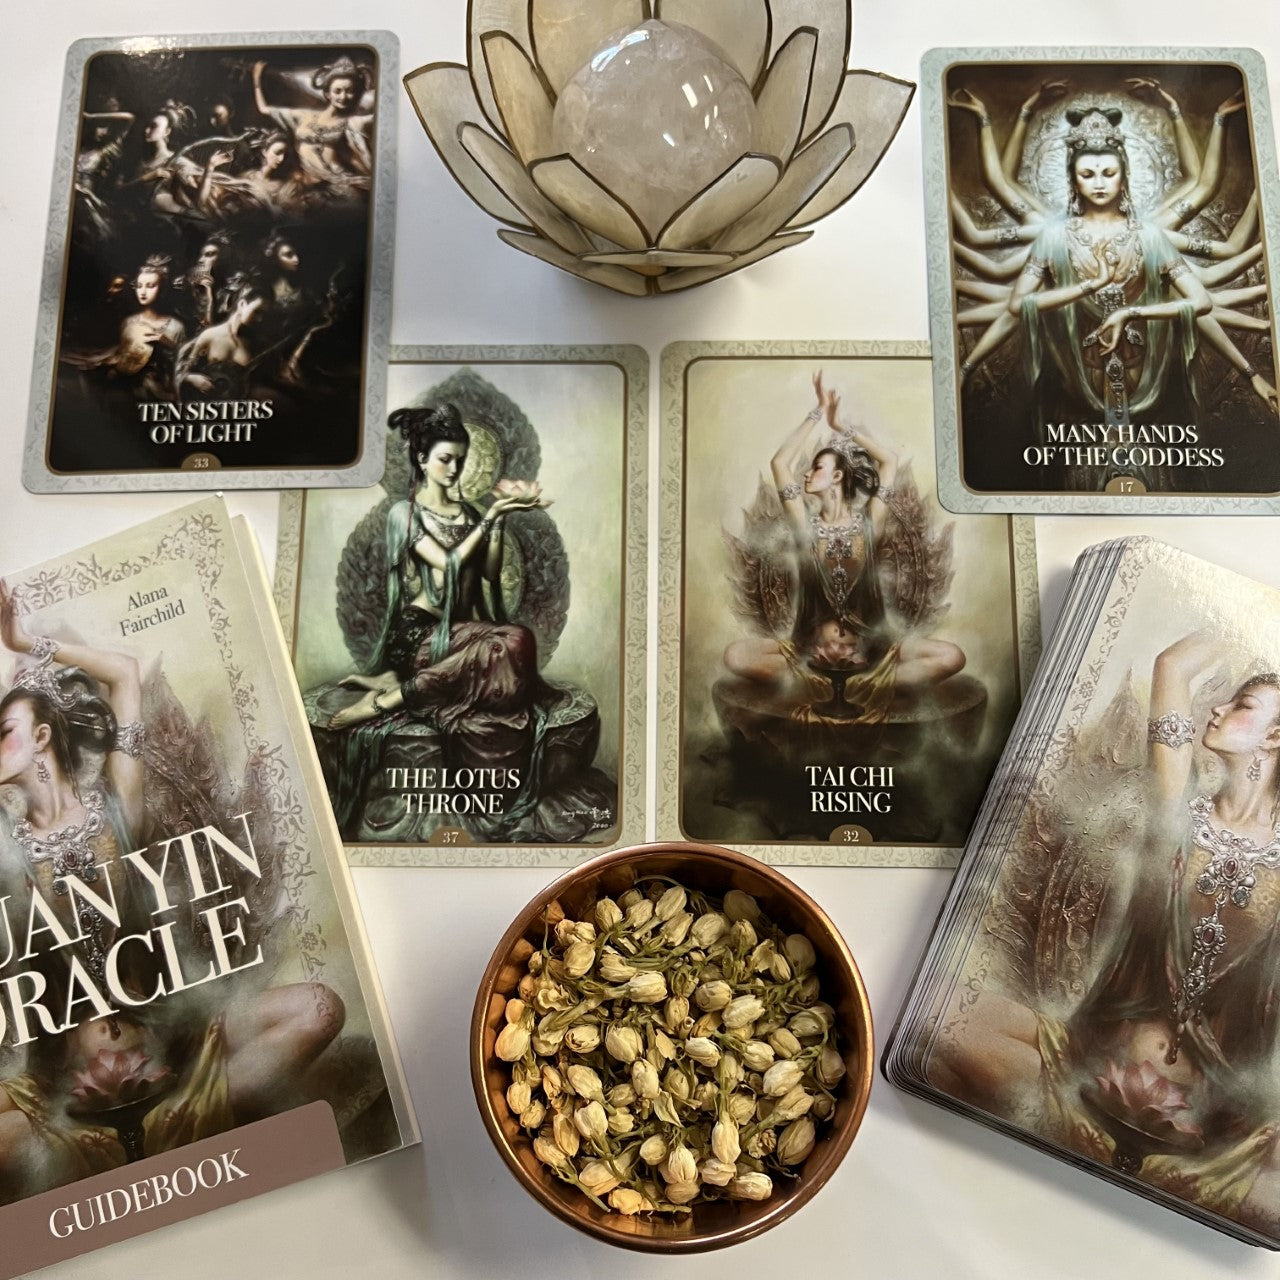 Kuan Yin Oracle: Blessings, Guidance & Enlightenment from the Divine Feminine by Alana Fairchild